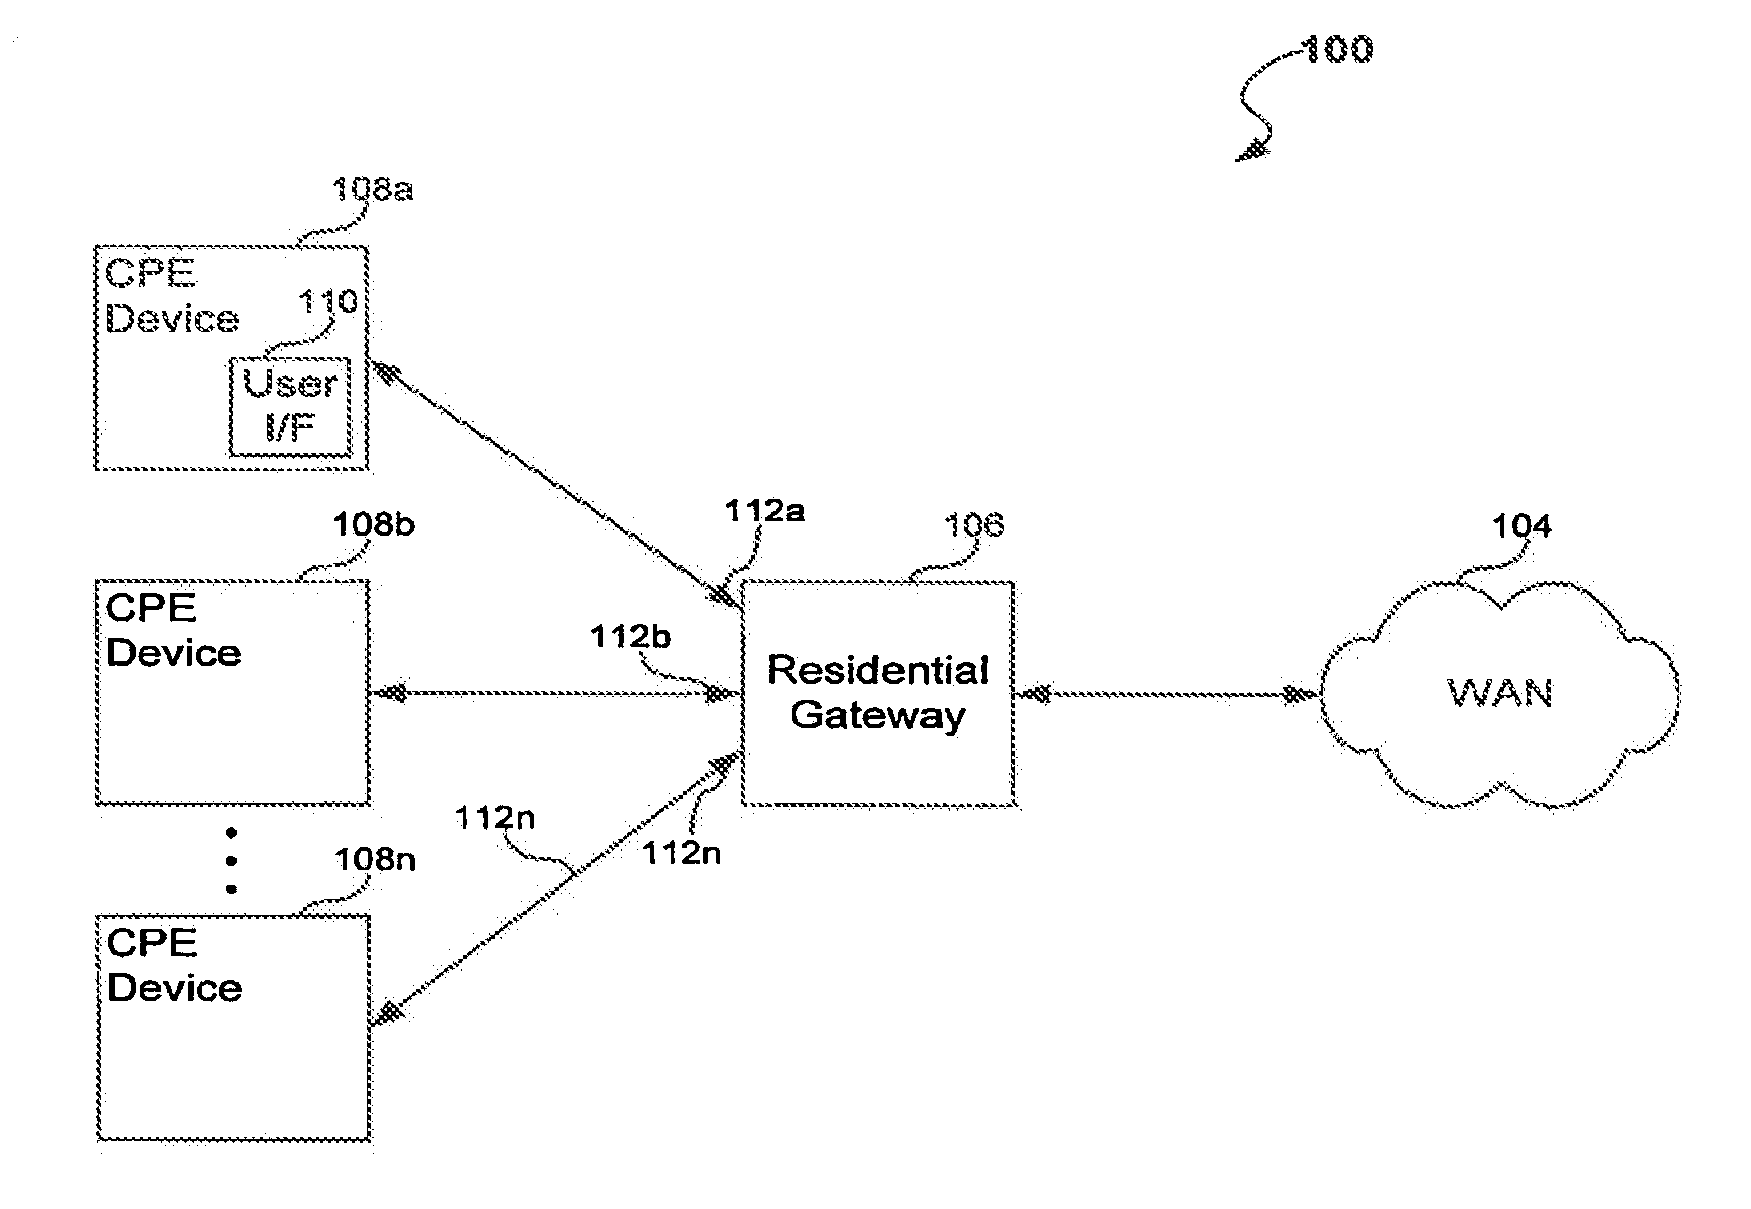 System, Method and Computer Program Product for Residential Gateway Monitoring and Control